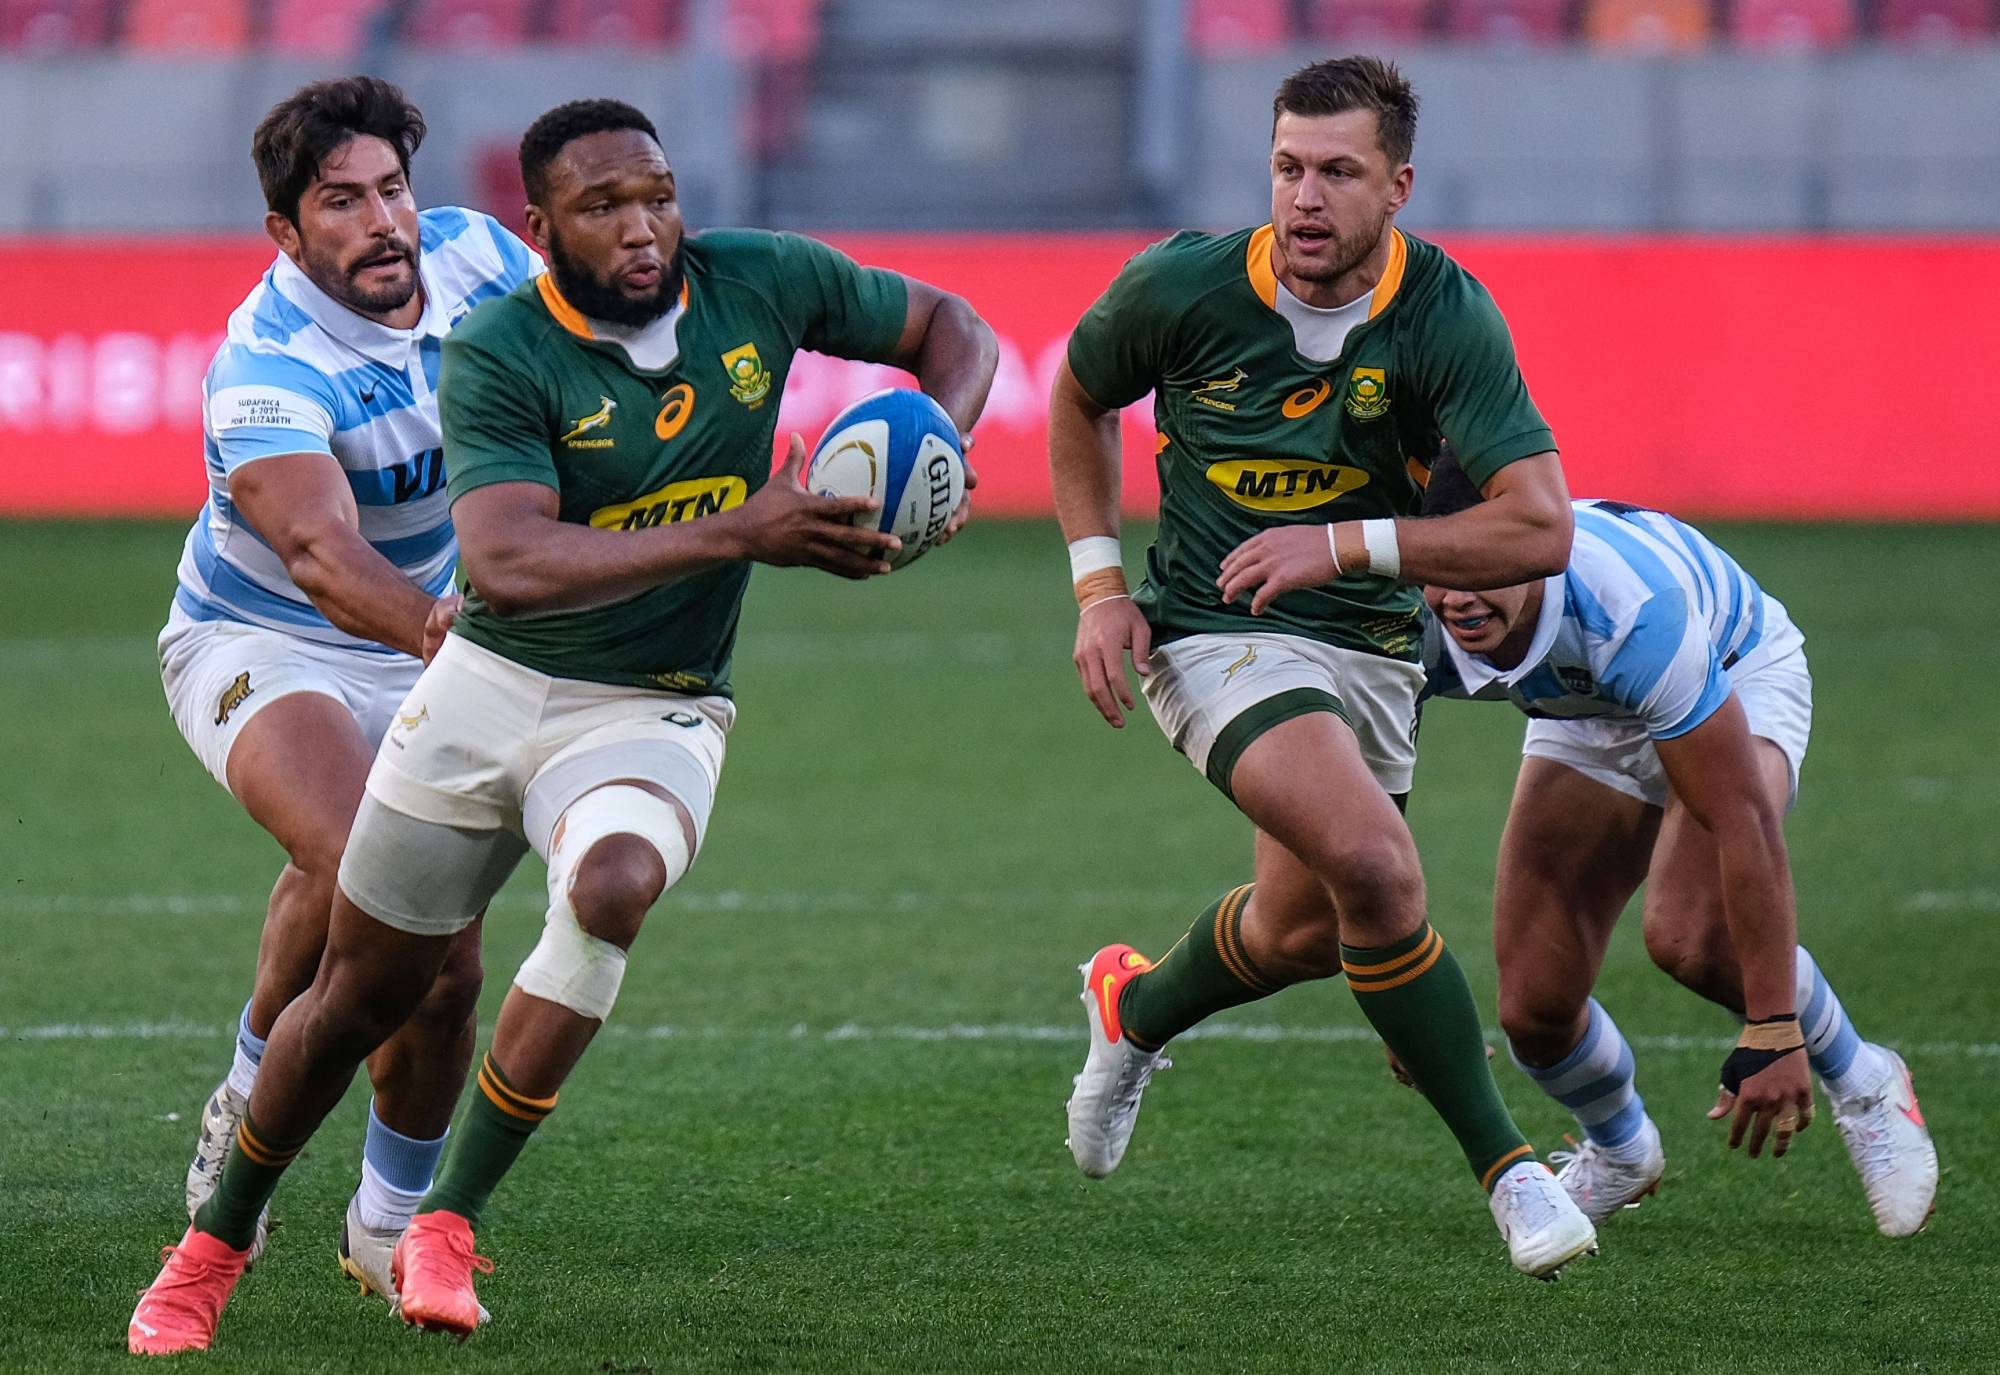 Springboks coach says South Africa ready to host Rugby Championship